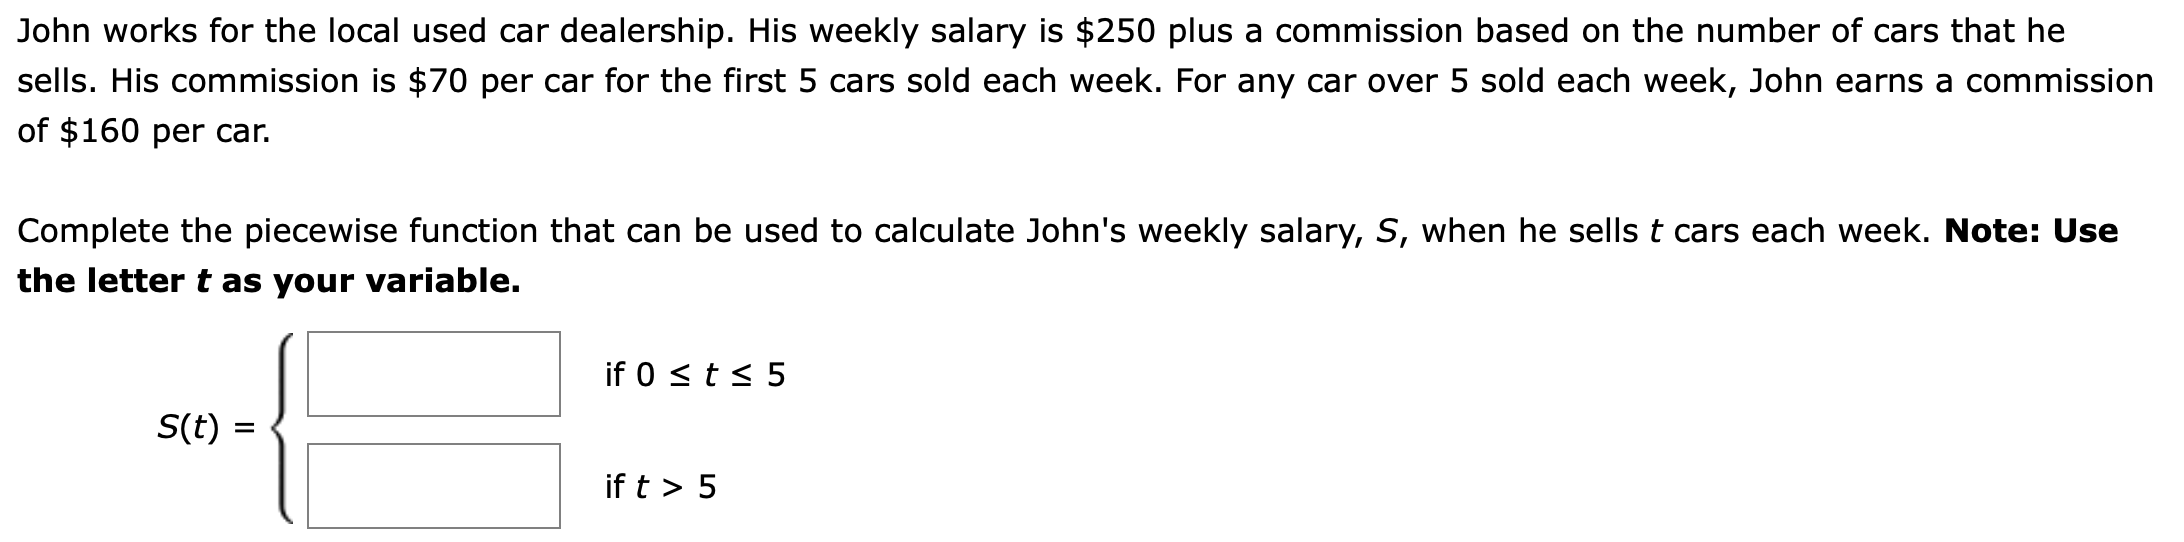 John works for the local used car dealership. His weekly salary is $250 plus a commission based on the number of cars that he
sells. His commission is $70 per car for the first 5 cars sold each week. For any car over 5 sold each week, John earns a commission
of $160 per car.
Complete the piecewise function that can be used to calculate John's weekly salary, S, when he sellst cars each week. Note: Use
the letter t as your variable.
if 0 s t s 5
S(t)
if t > 5
